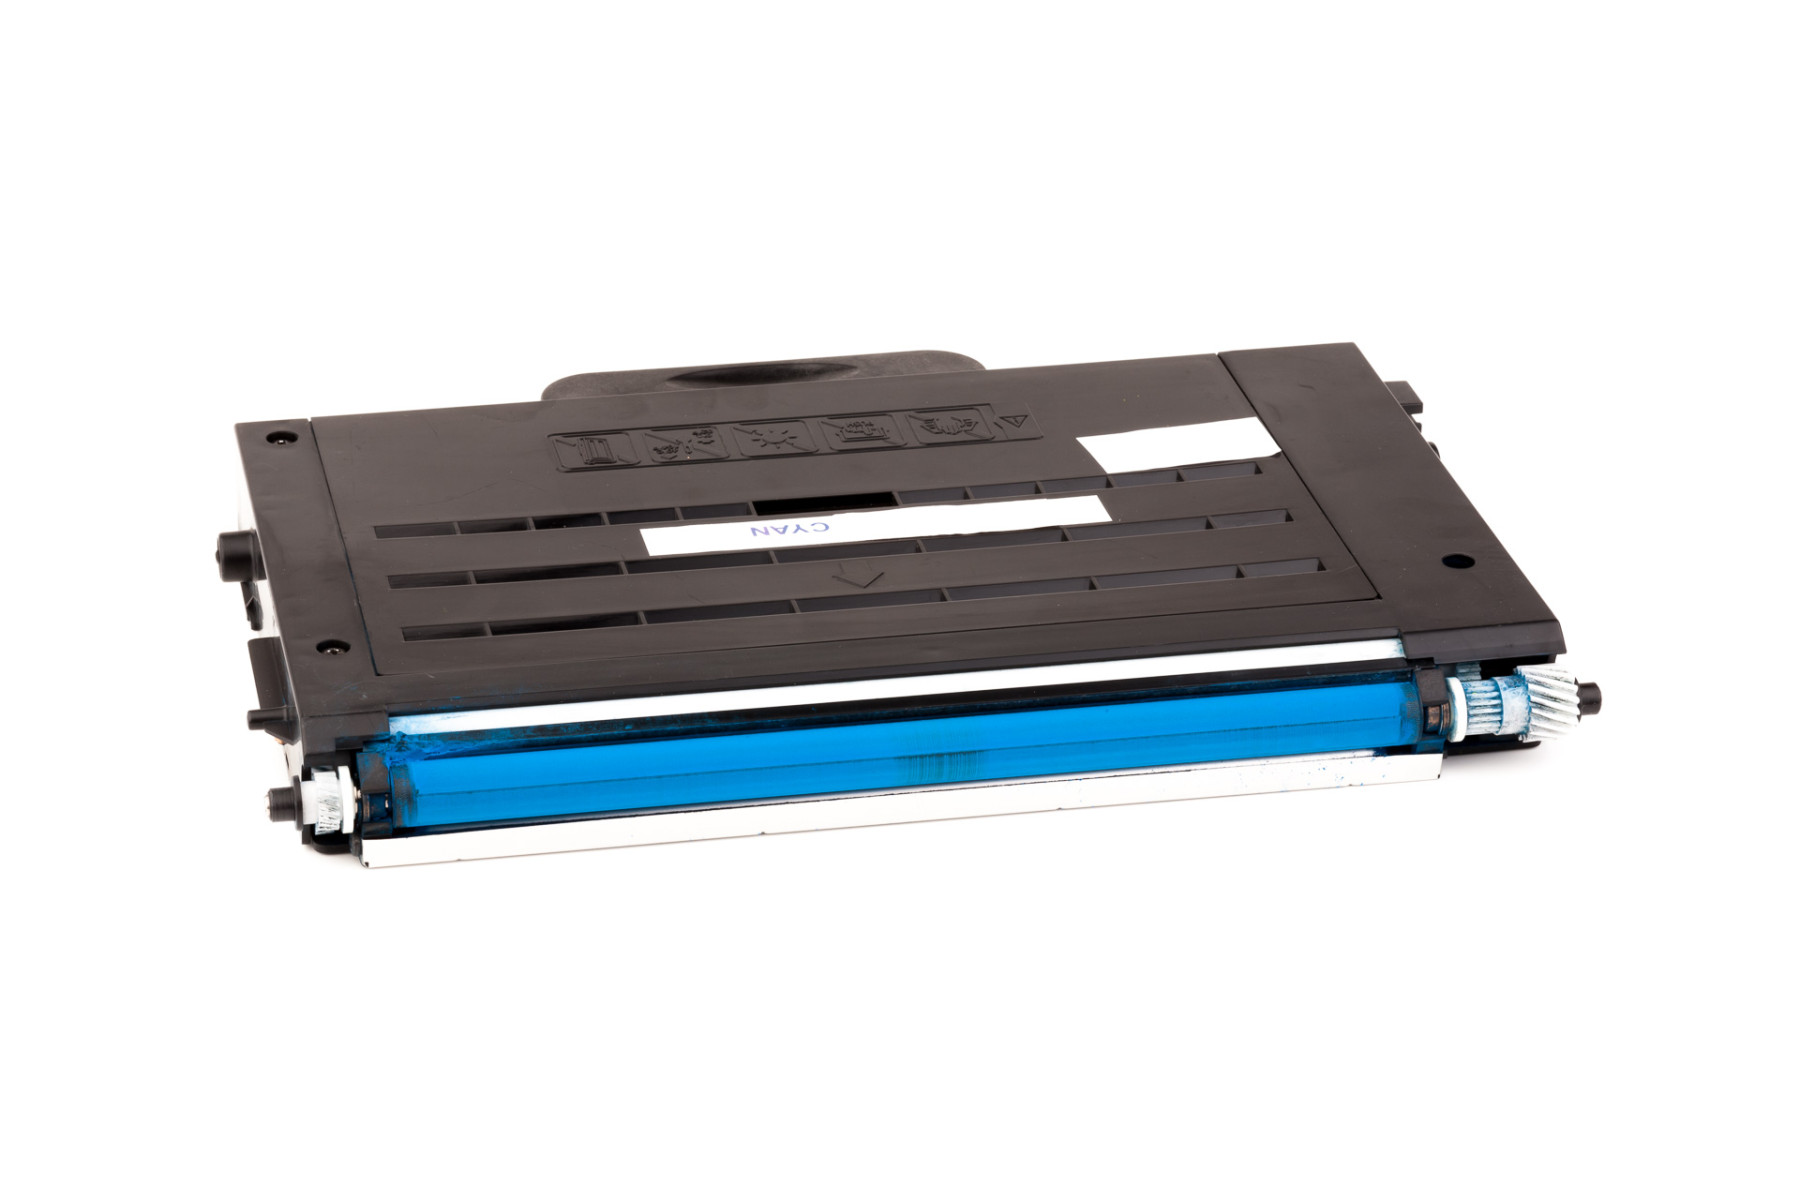 Set consisting of Toner cartridge (alternative) compatible with Xerox 106R00684/106 R 00684 - Phaser 6100 black, 106R00680/106 R 00680 - Phaser 6100 cyan, 106R00681/106 R 00681 - Phaser 6100 magenta, 106R00682/106 R 00682 - Phaser 6100 yellow - Save 6%